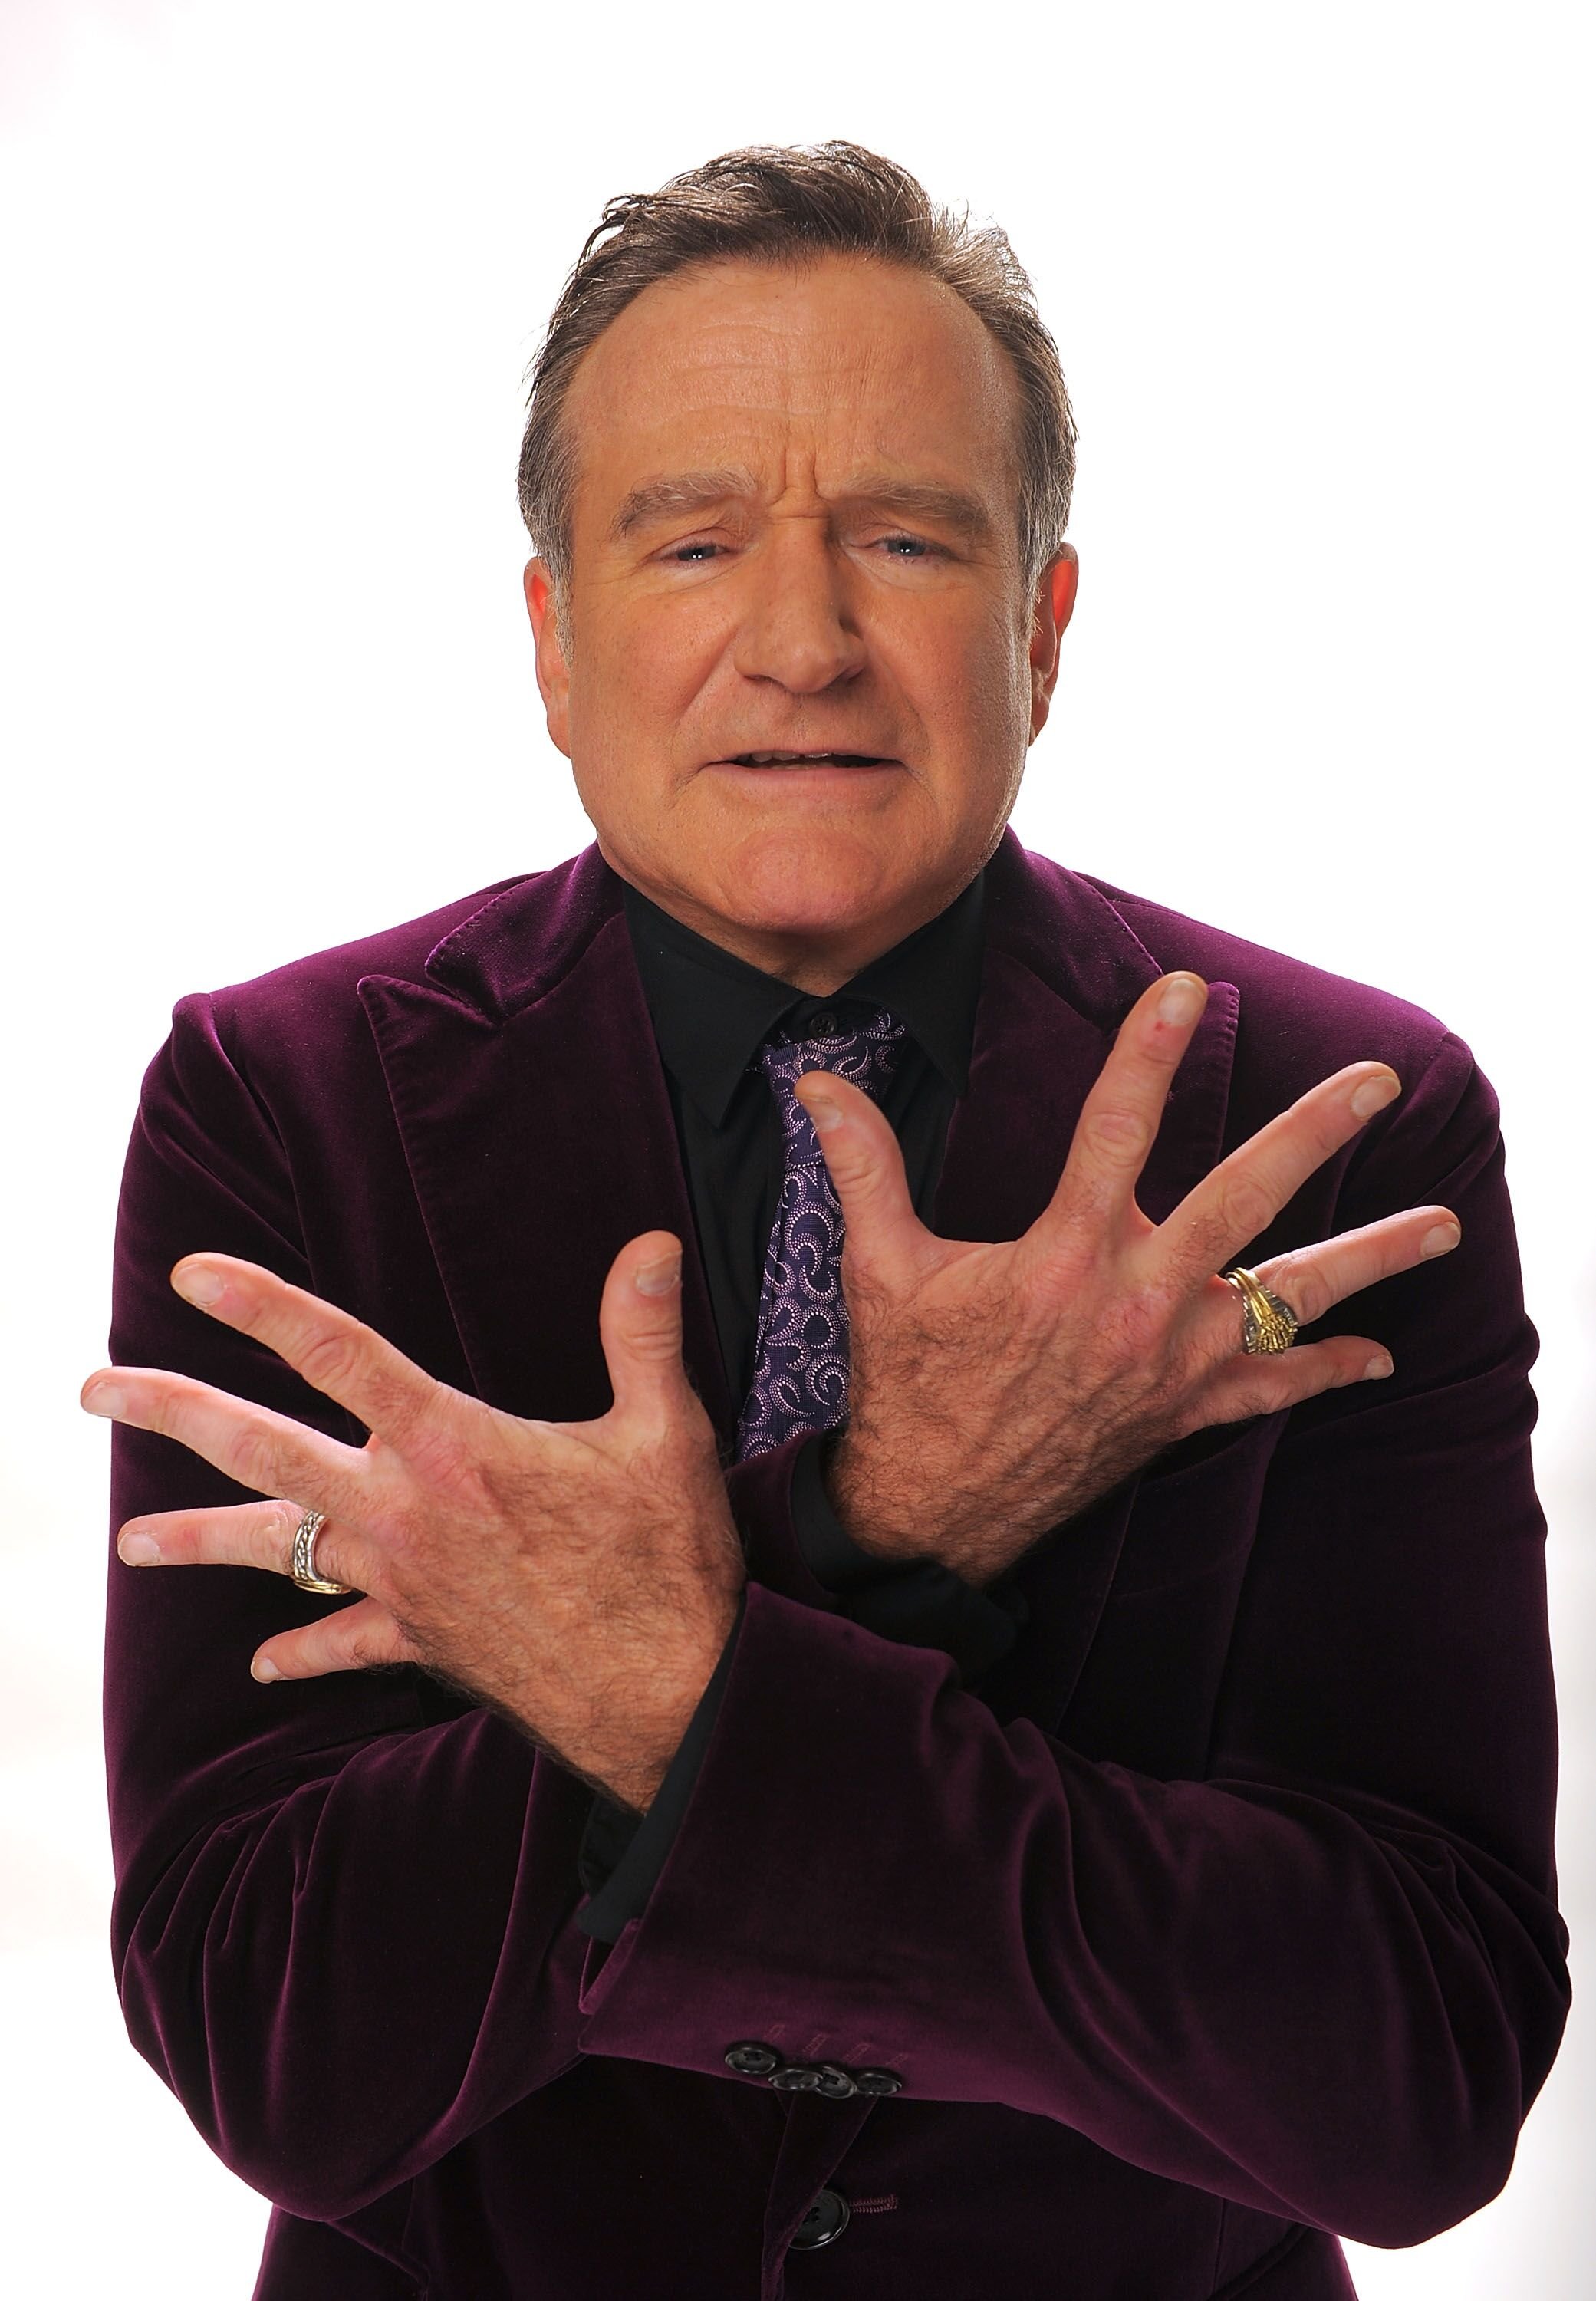 Actor Robin Williams poses for a portrait during the 35th Annual People's Choice Awards. | Source: Getty Images